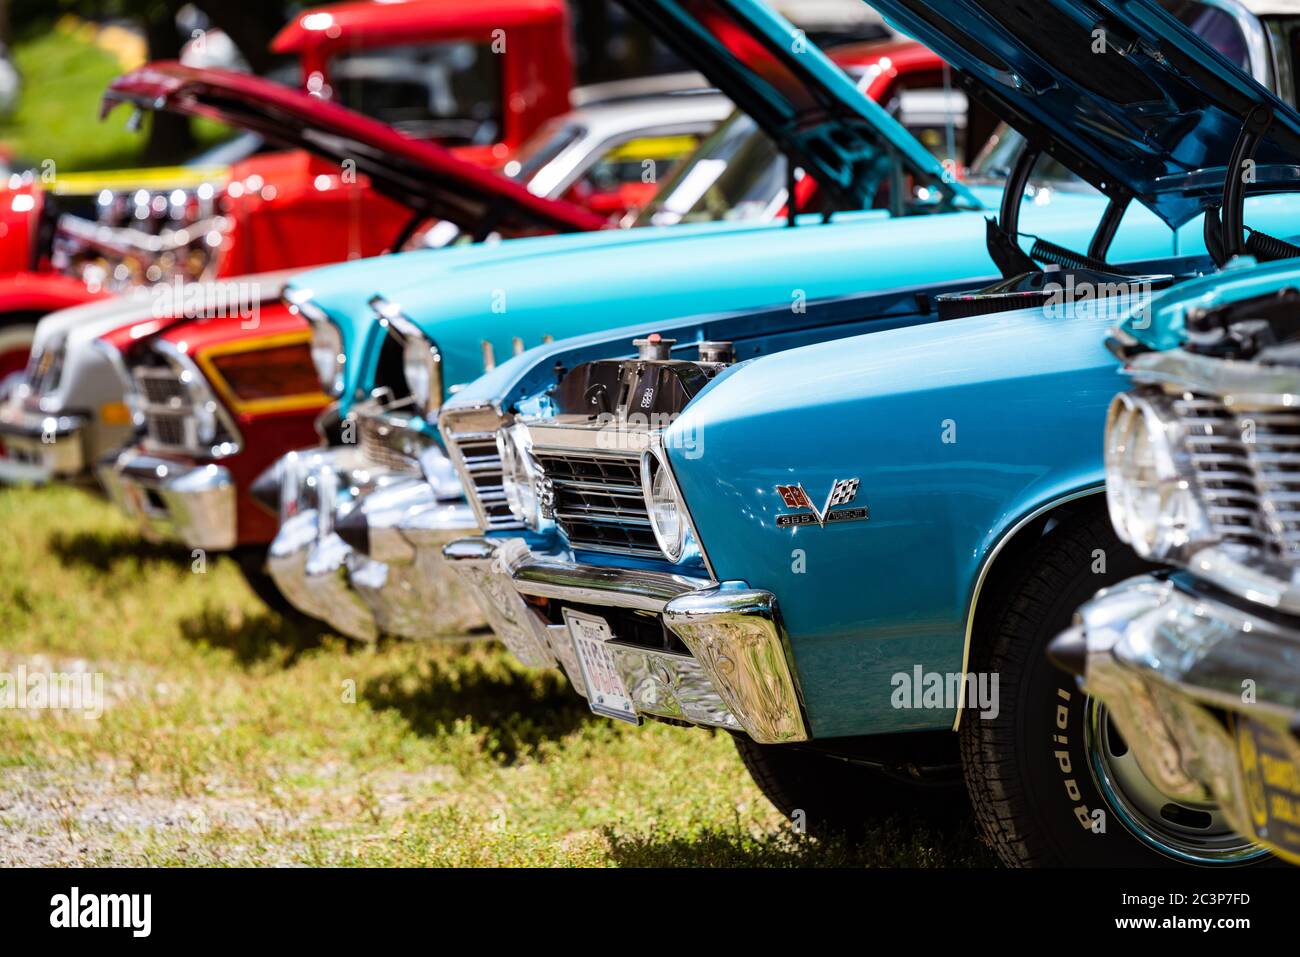 Media, PA / USA. Around one hundred vintage and antique vehicles were on display for the Linvilla Orchards Antique Car Show, with vehicles judged by the Historical Car Cub of Pennsylvania. June 21 2020. Credit: Christopher Evens Stock Photo